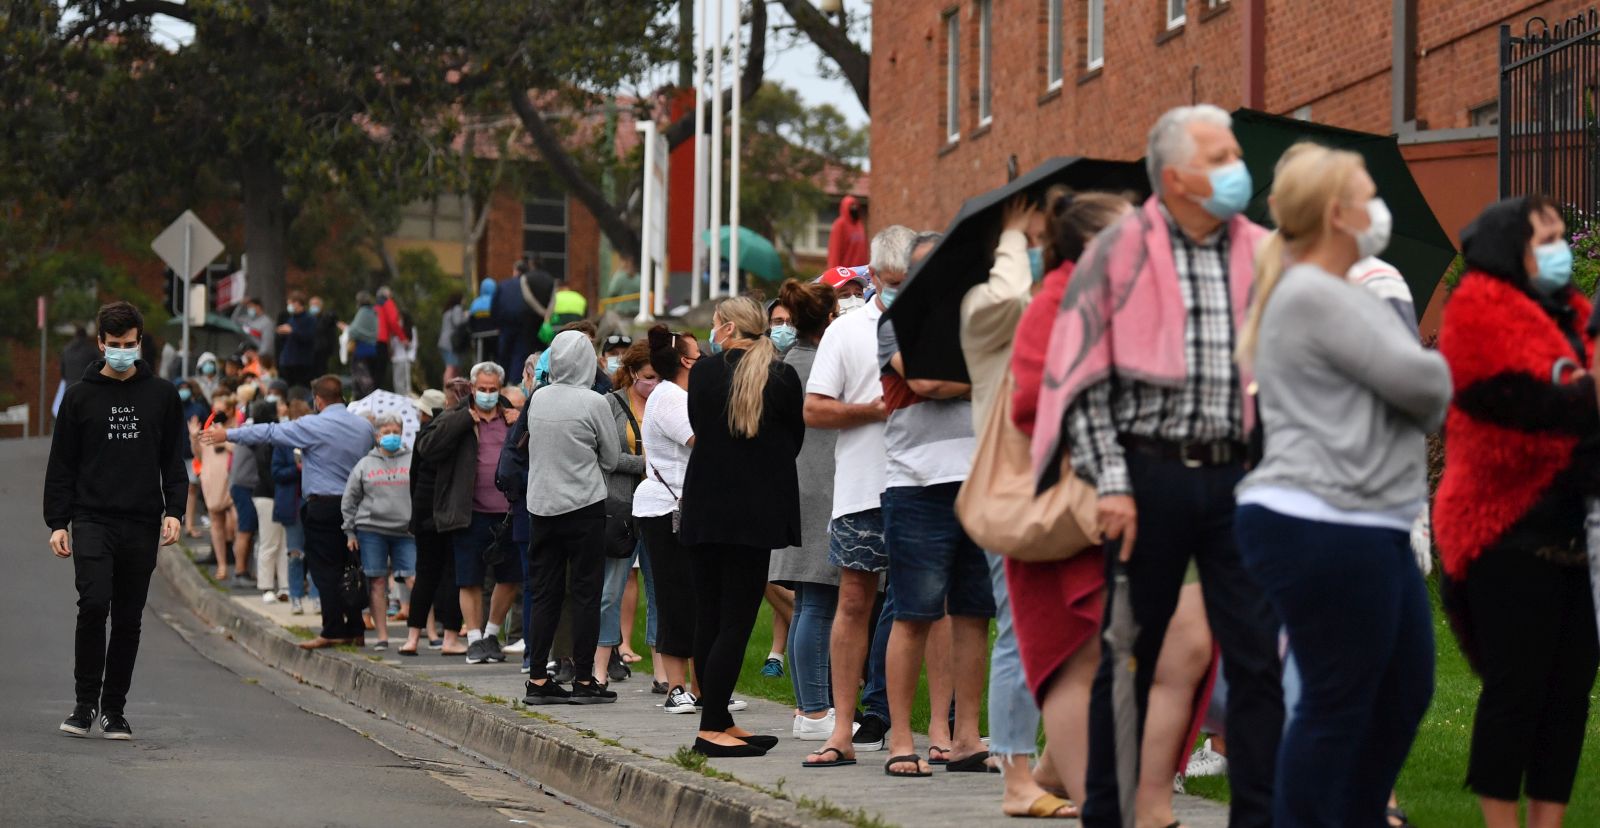 epa08908780 Long lines of people waiting to be tested for COVID-19 snake around the block at Wollongong Hospital in Wollongong, New South Wales (NSW), Australia, 29 December 2020. The NSW south coast town of Wollongong is on high alert after one new case of COVID-19 was identified.  EPA/DEAN LEWINS AUSTRALIA AND NEW ZEALAND OUT